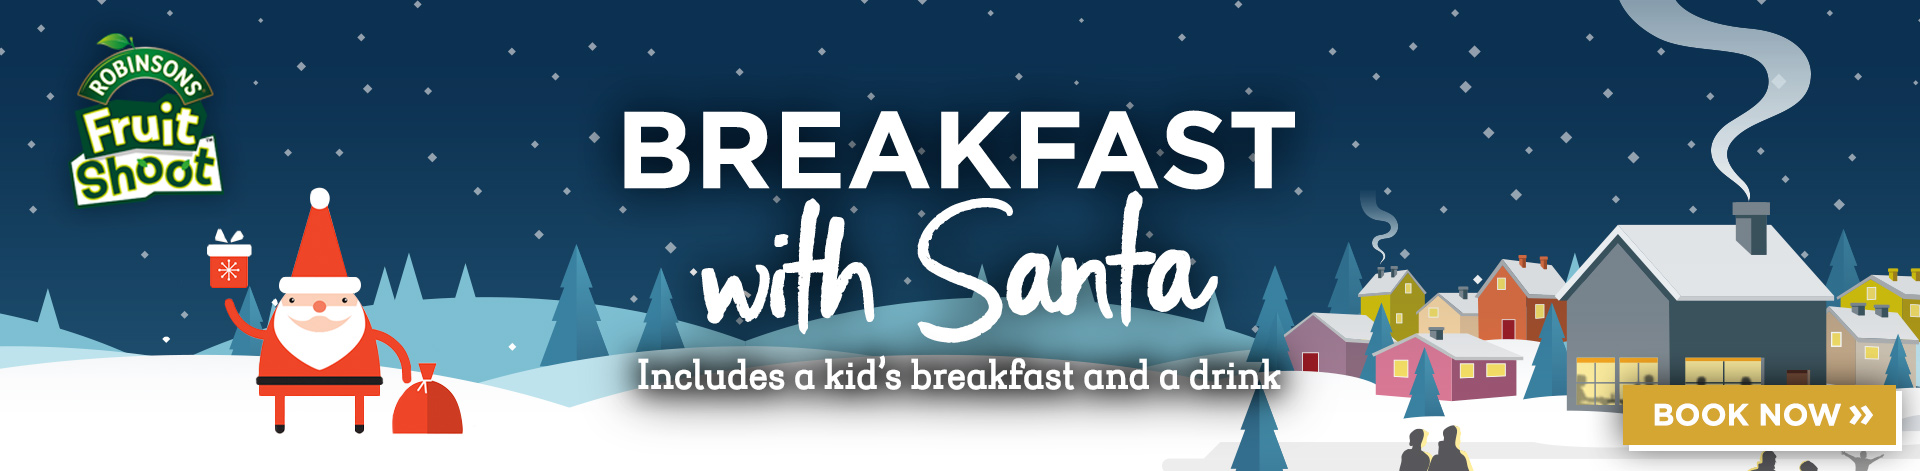 Breakfast with Santa menu at The Old Moat House